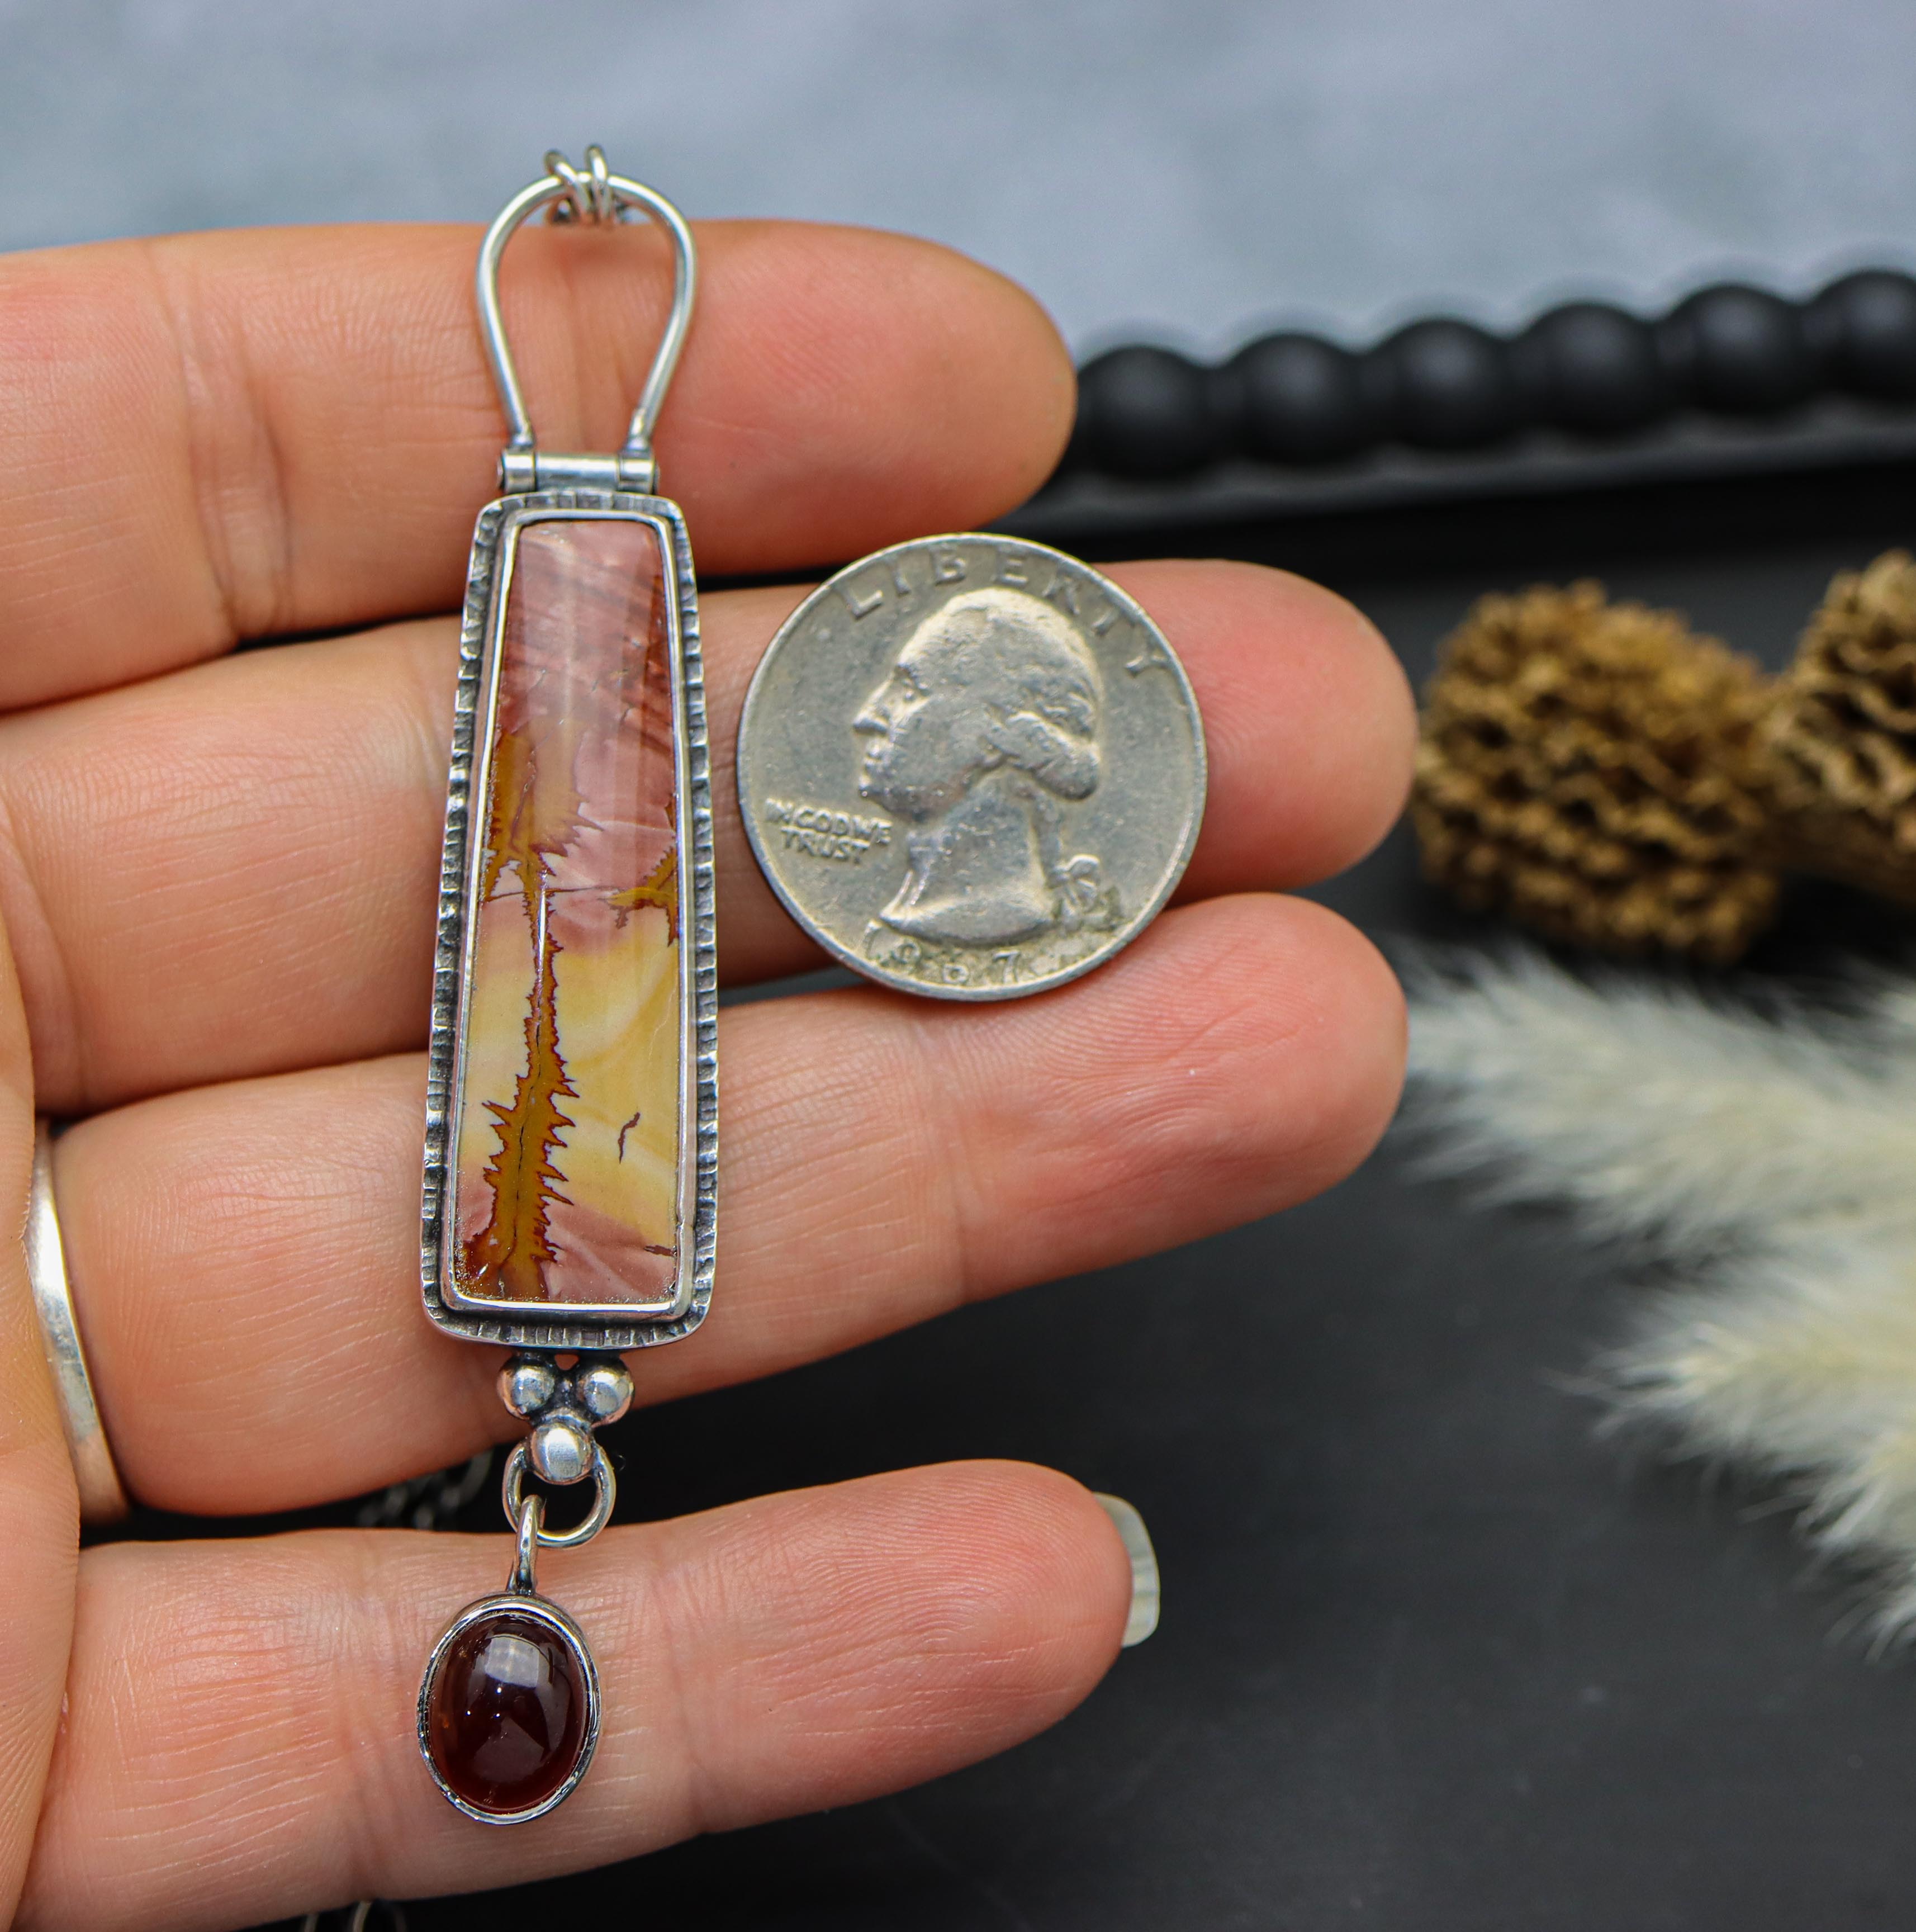 Red Falcon Jasper and Hessonite Garnet Pendant Sterling Silver One Of a Kind Gemstone Necklace